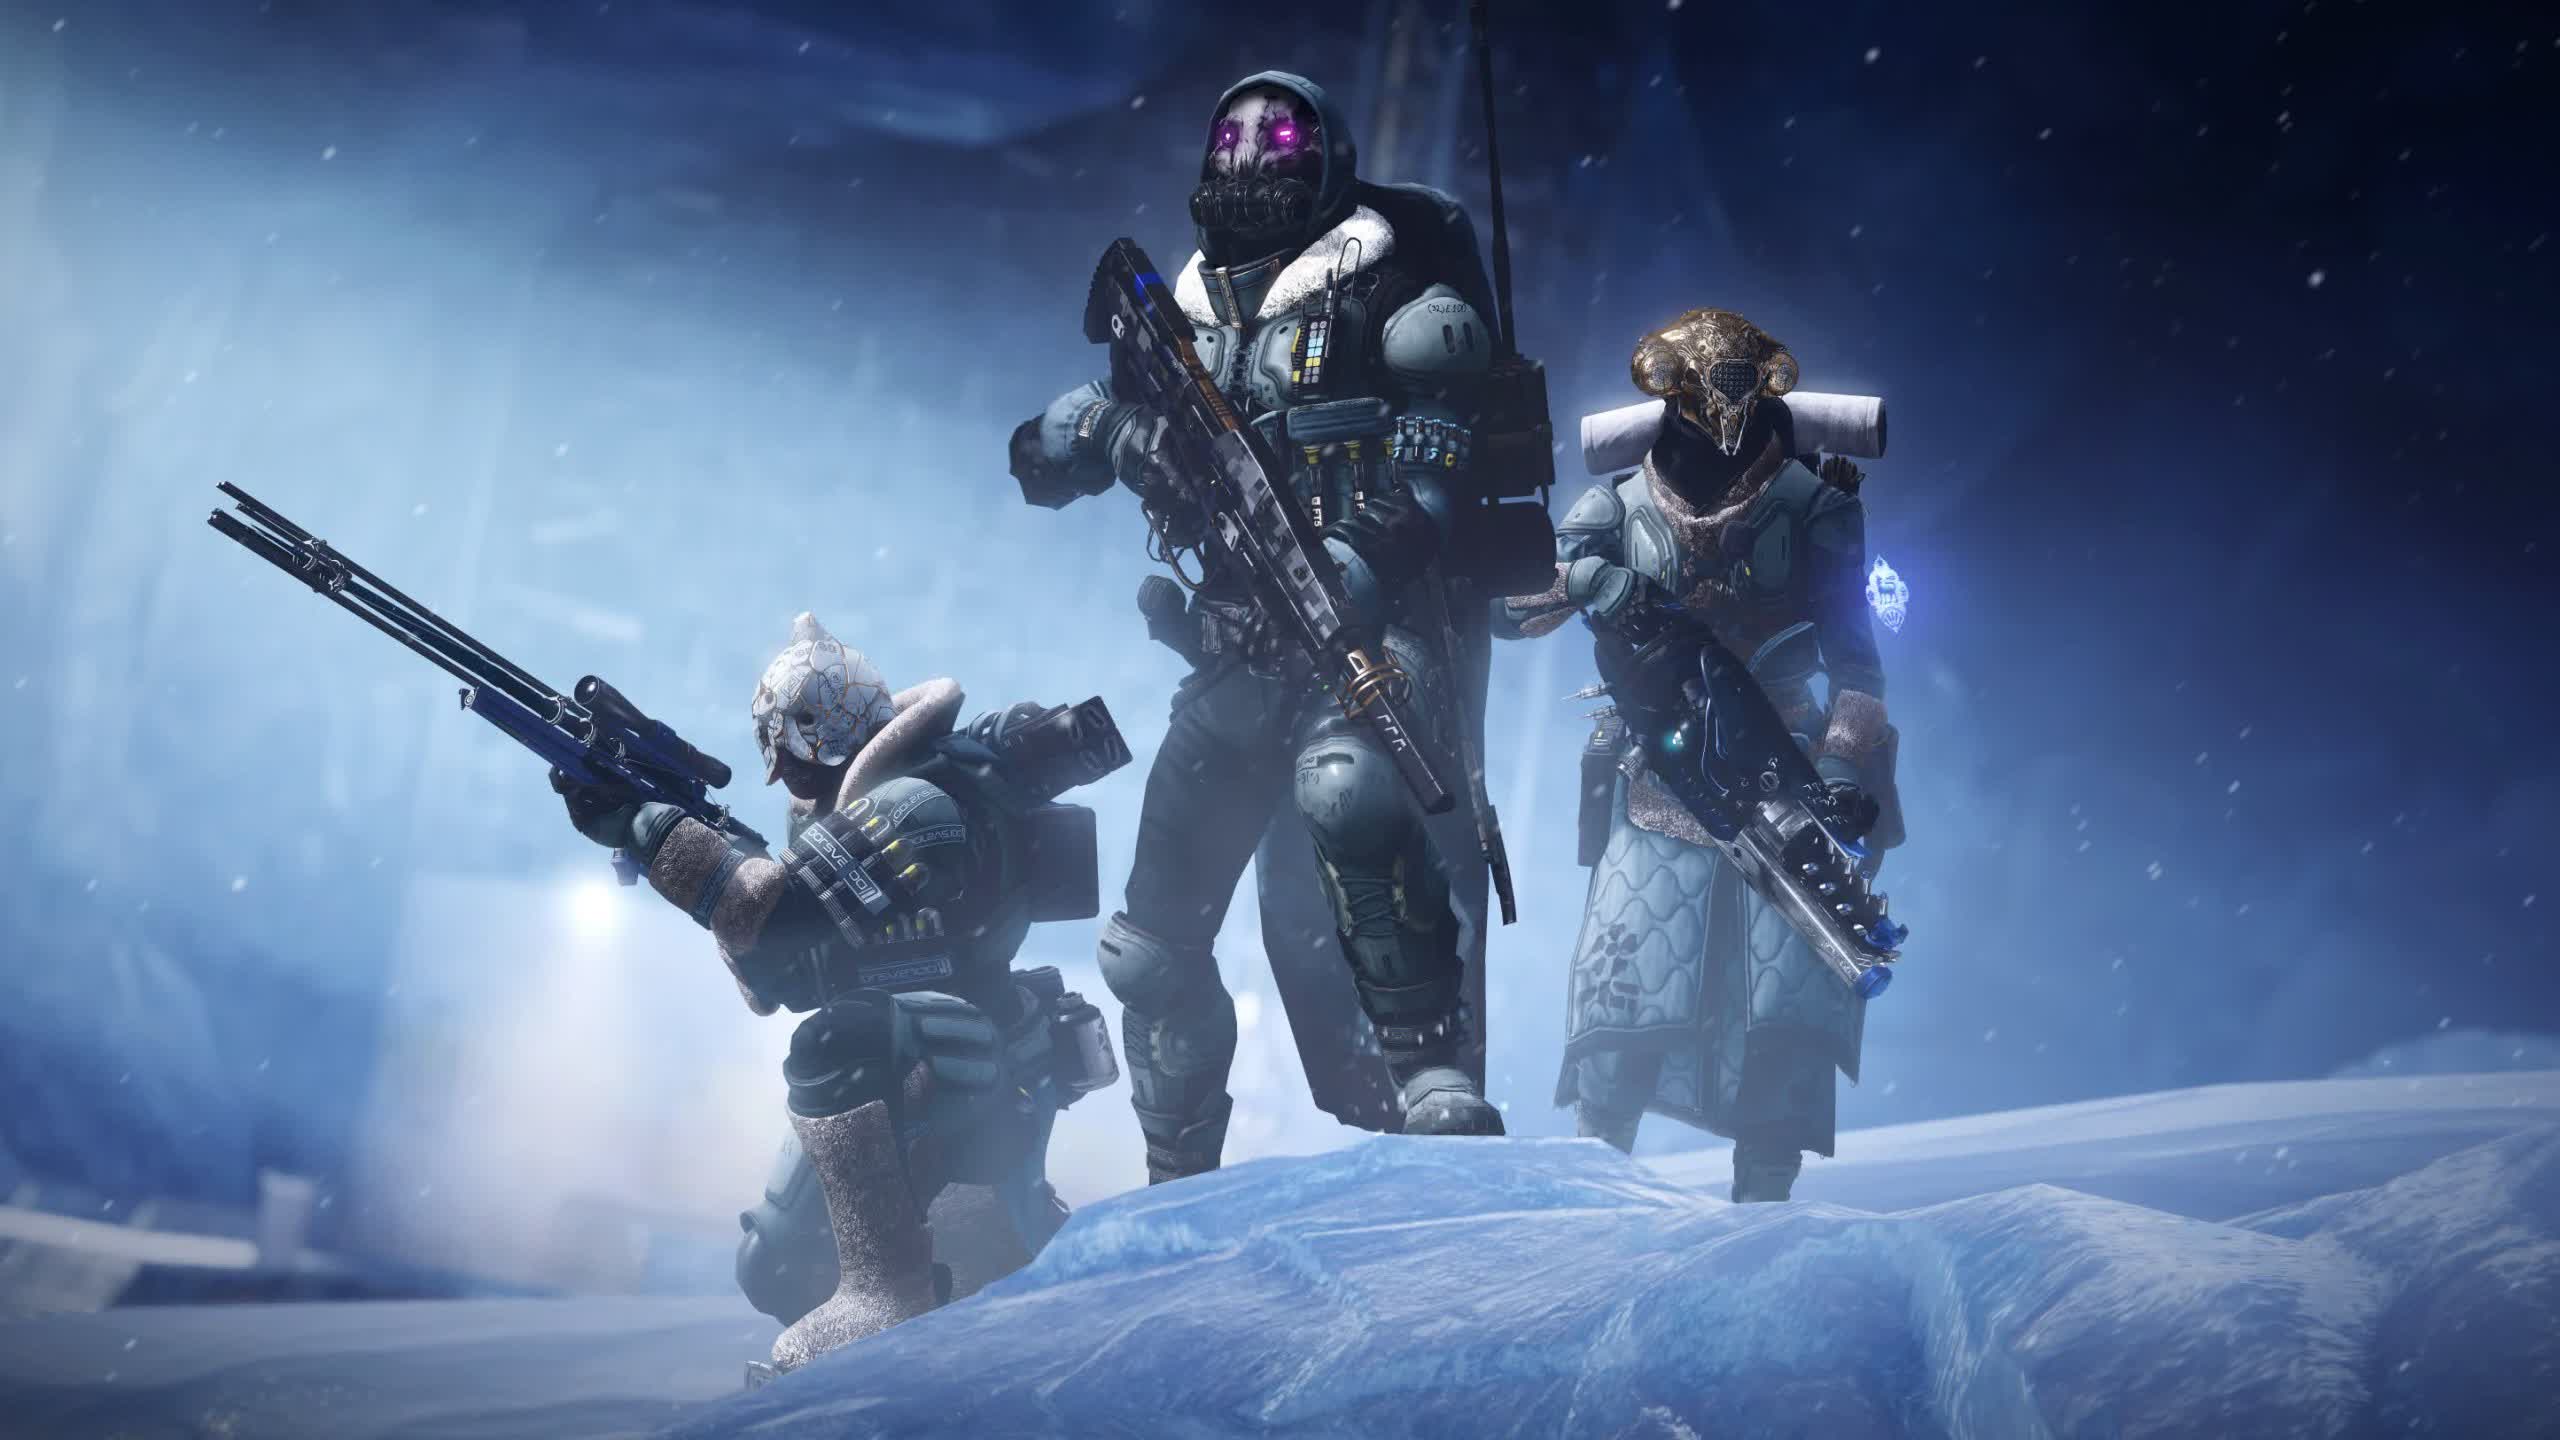 Destiny 2 veterans come to 'The Rescue' of noobs stuck in the Dares of Eternity DLC